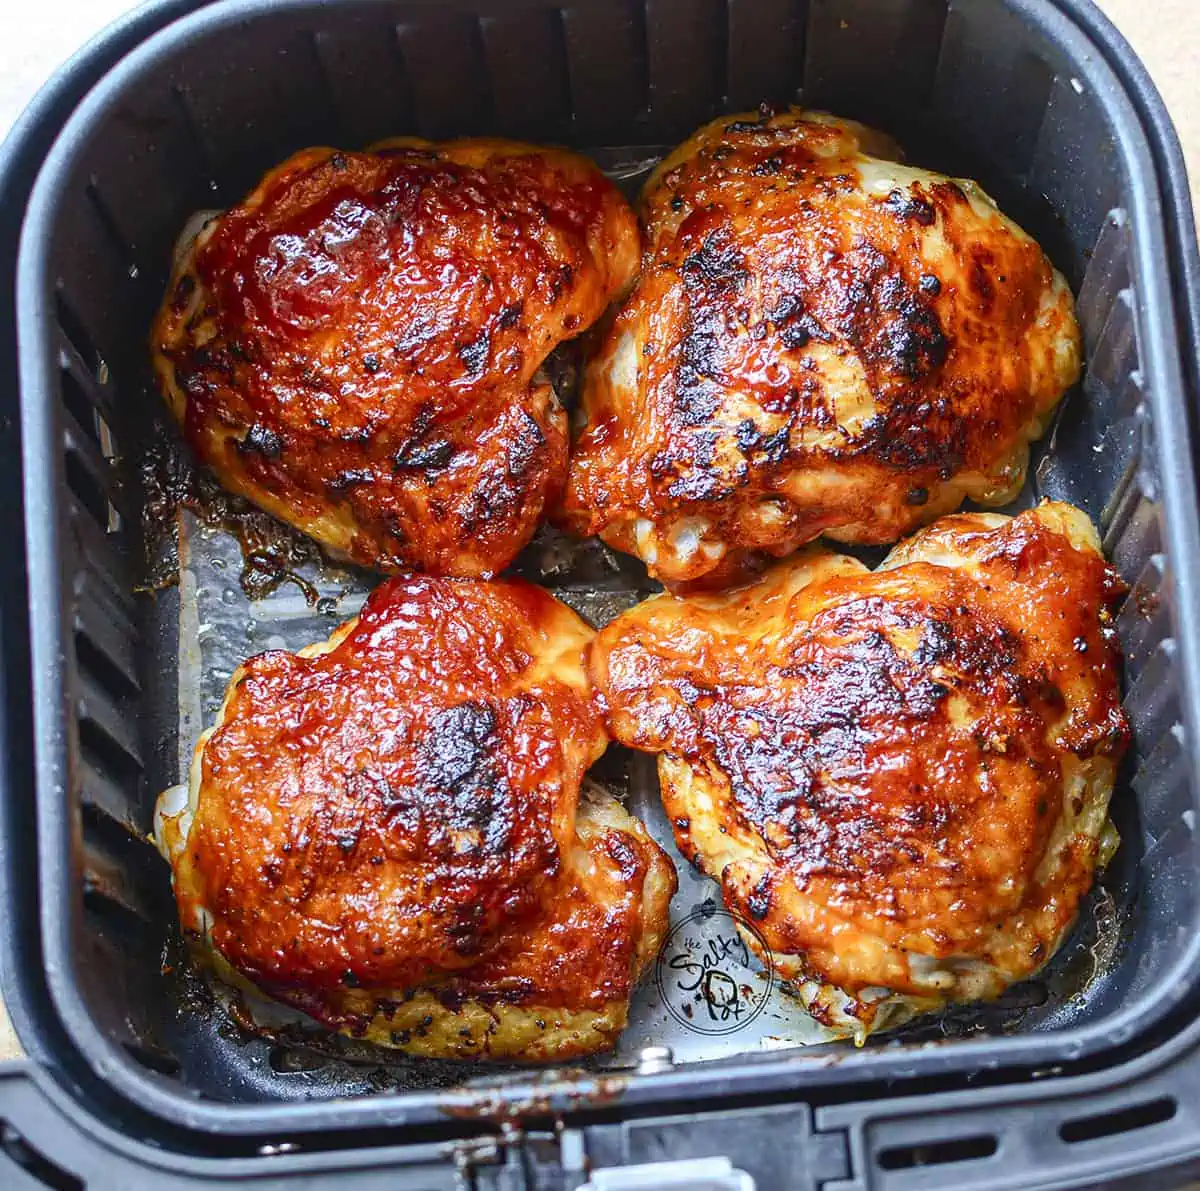 4 fully cooked chicken thighs with crispy skin inside the air fryer basket.